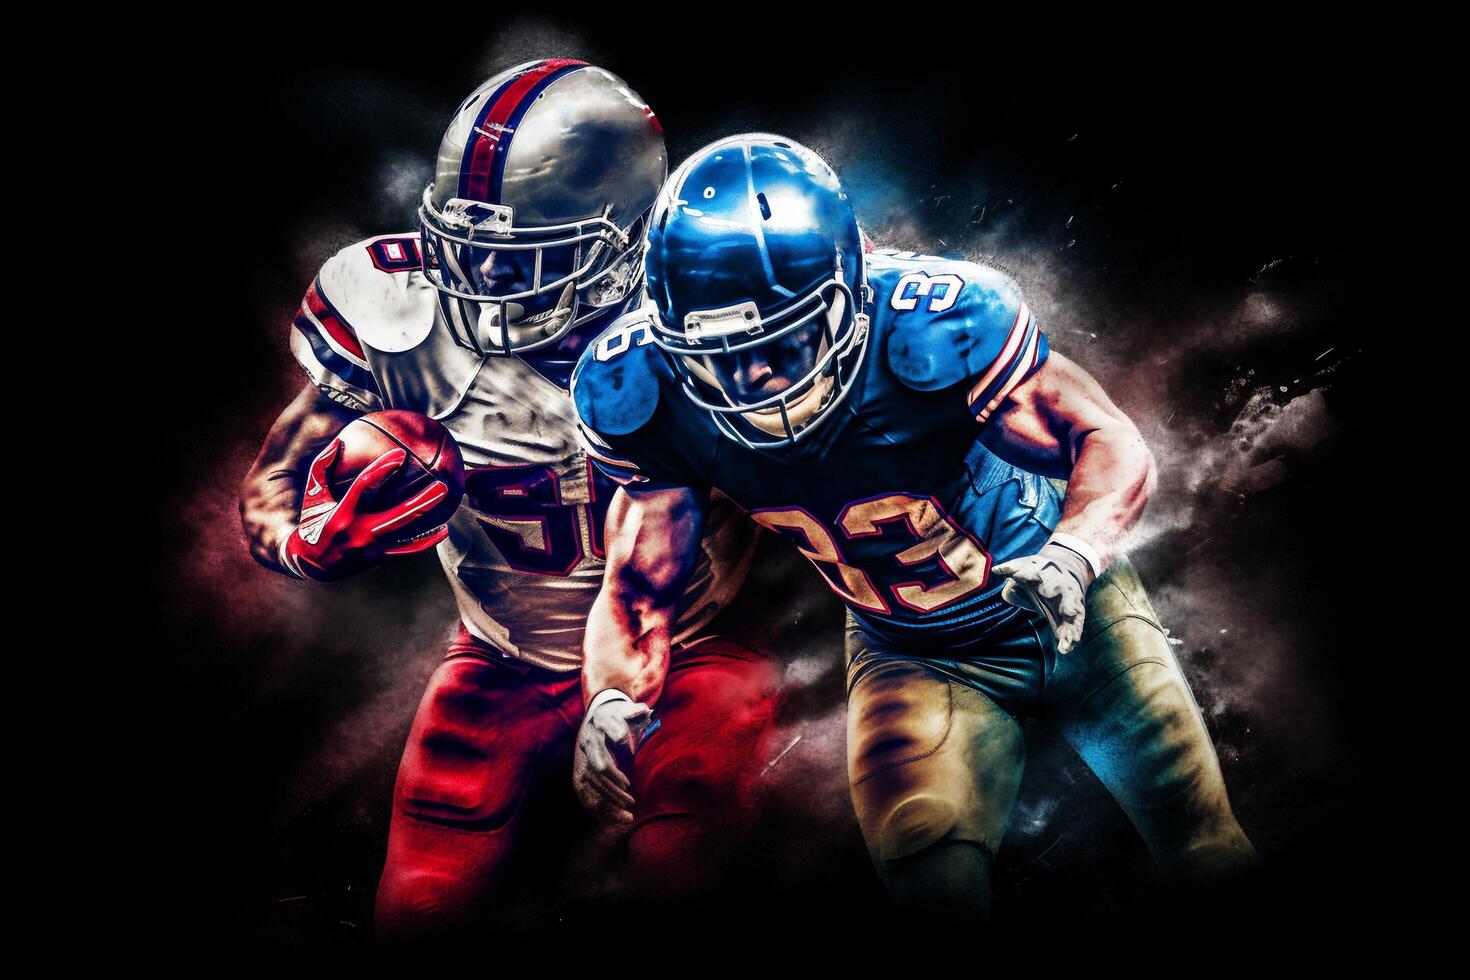 American football player in action on a dark smoky background with . photo